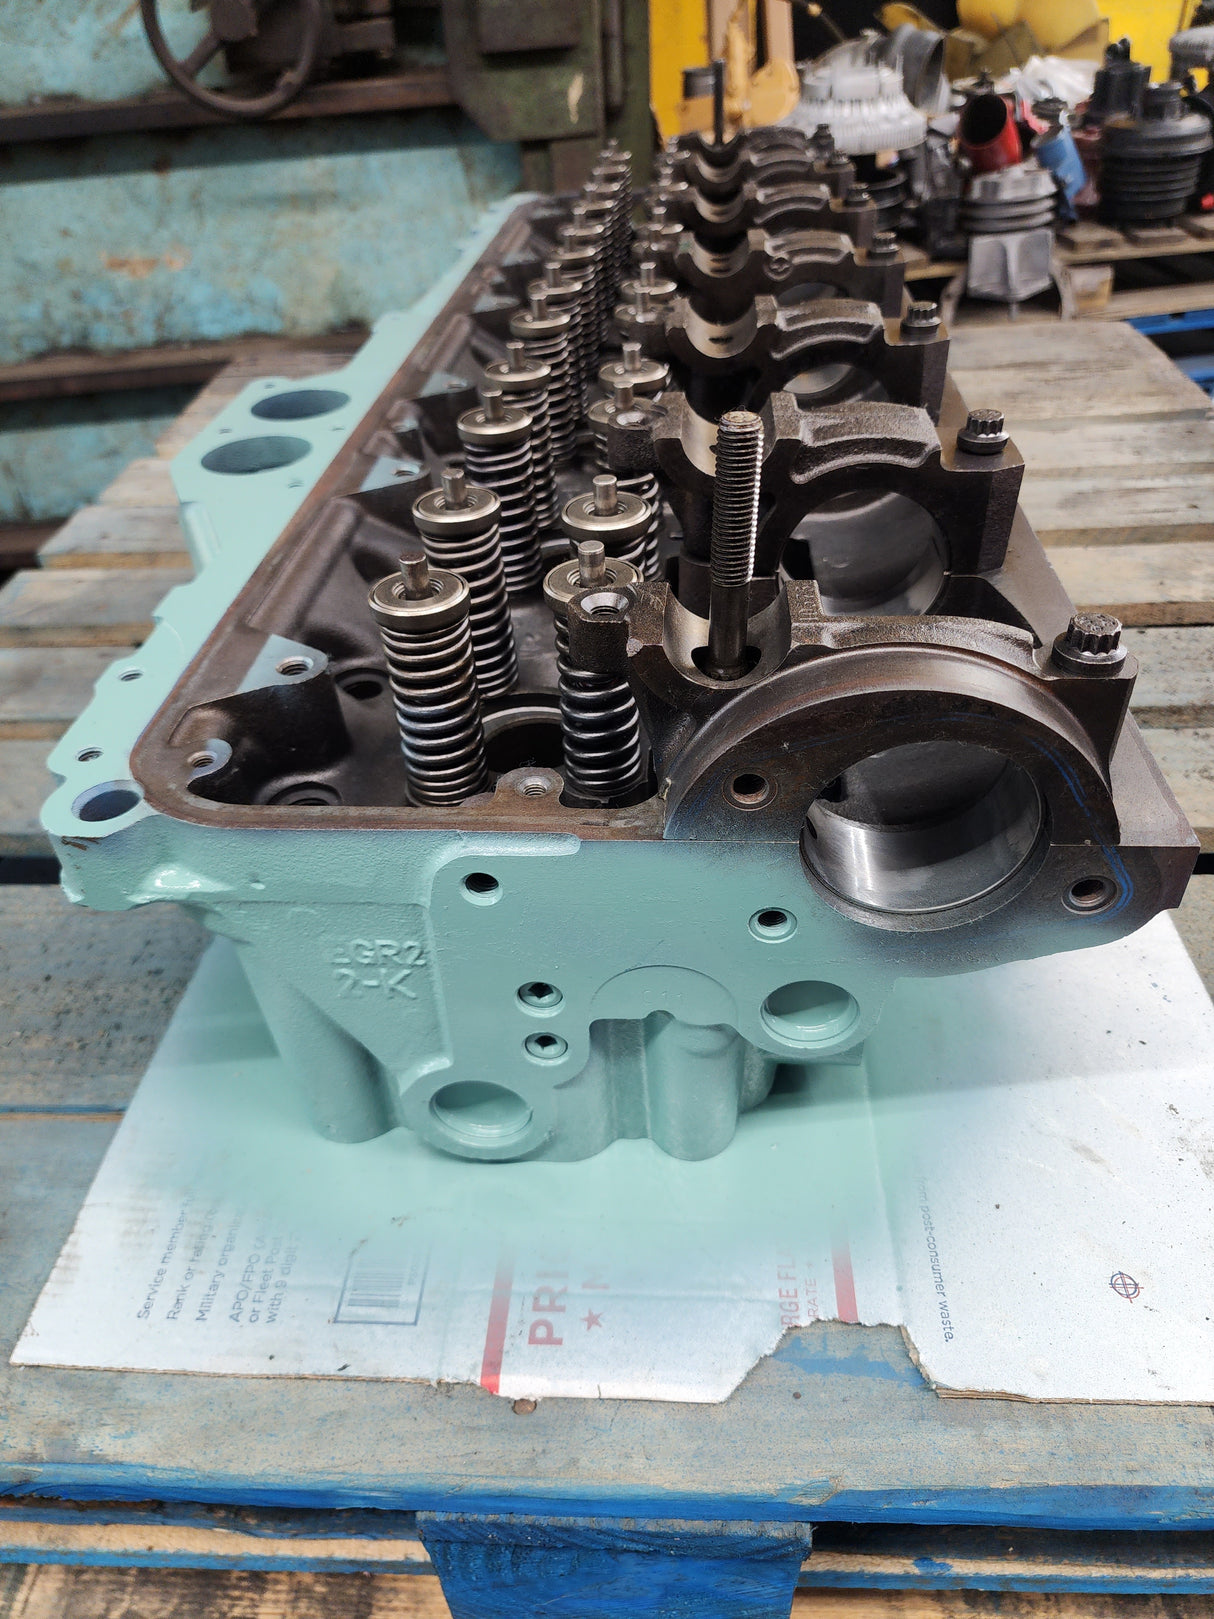 (GOOD USED) Detroit SERIES 60 14.0L CYLINDER HEAD FOR SALE